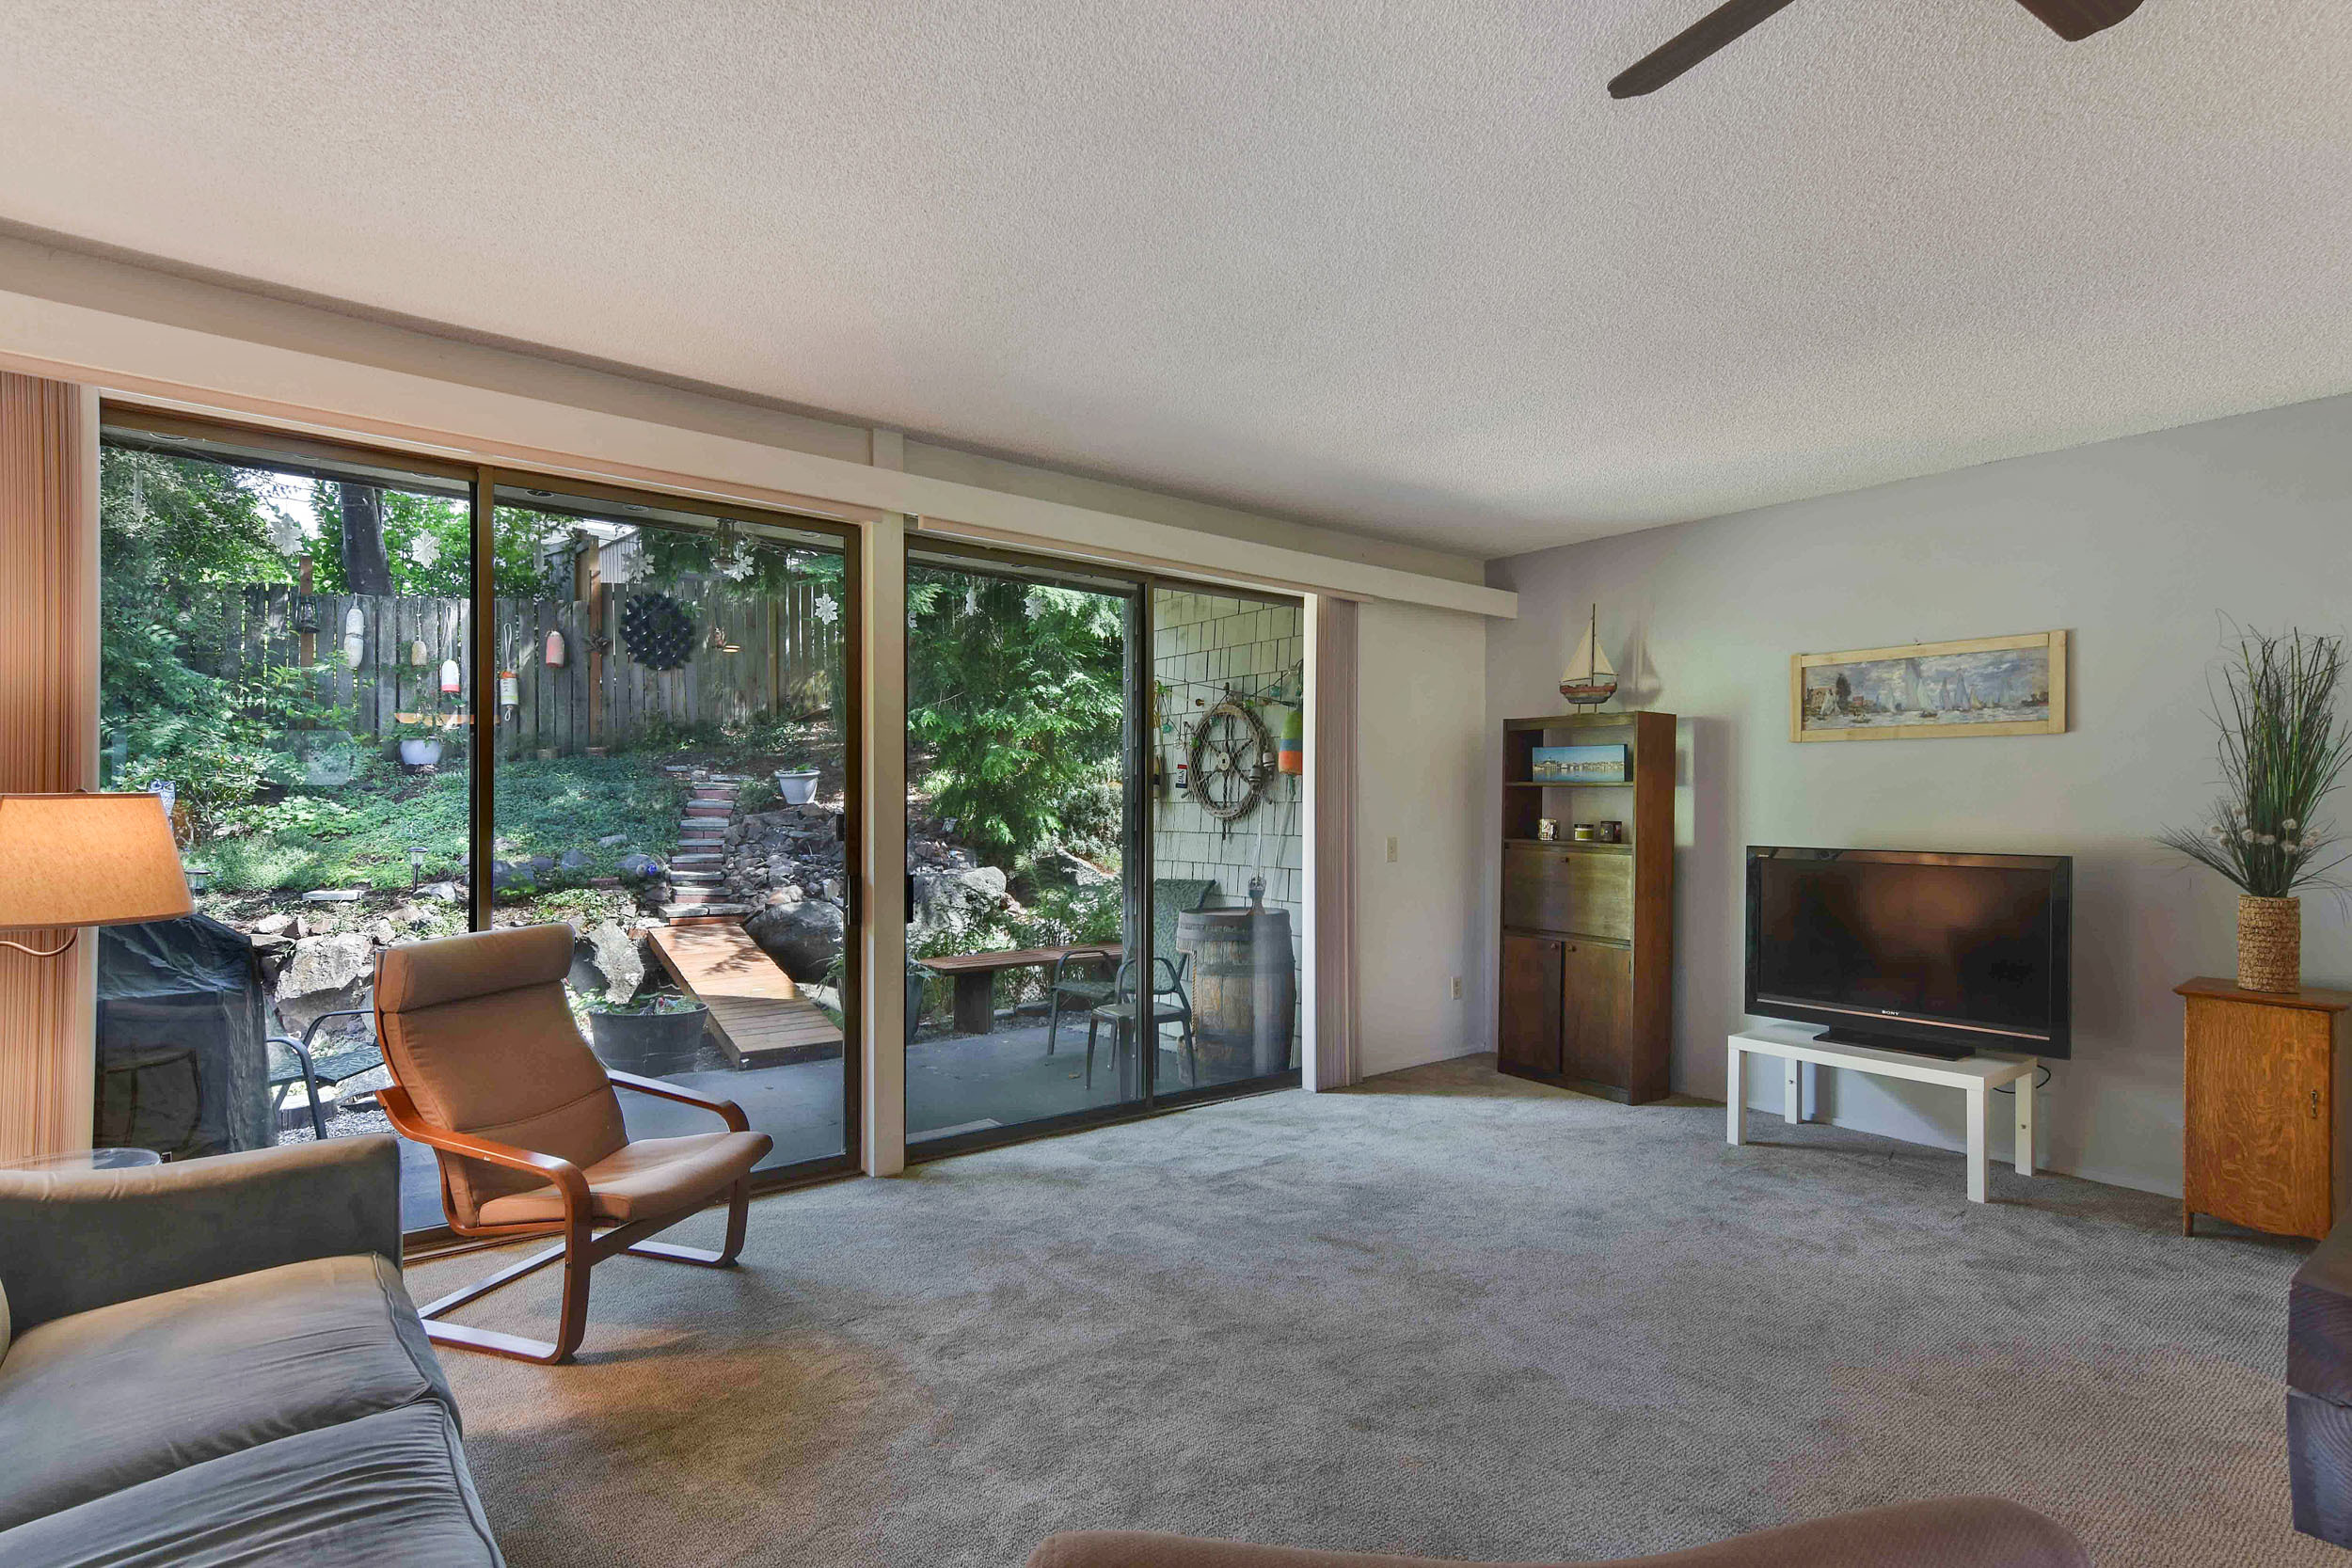 Property Photo: Living room 22715 Lakeview Dr J-1  WA 98043 